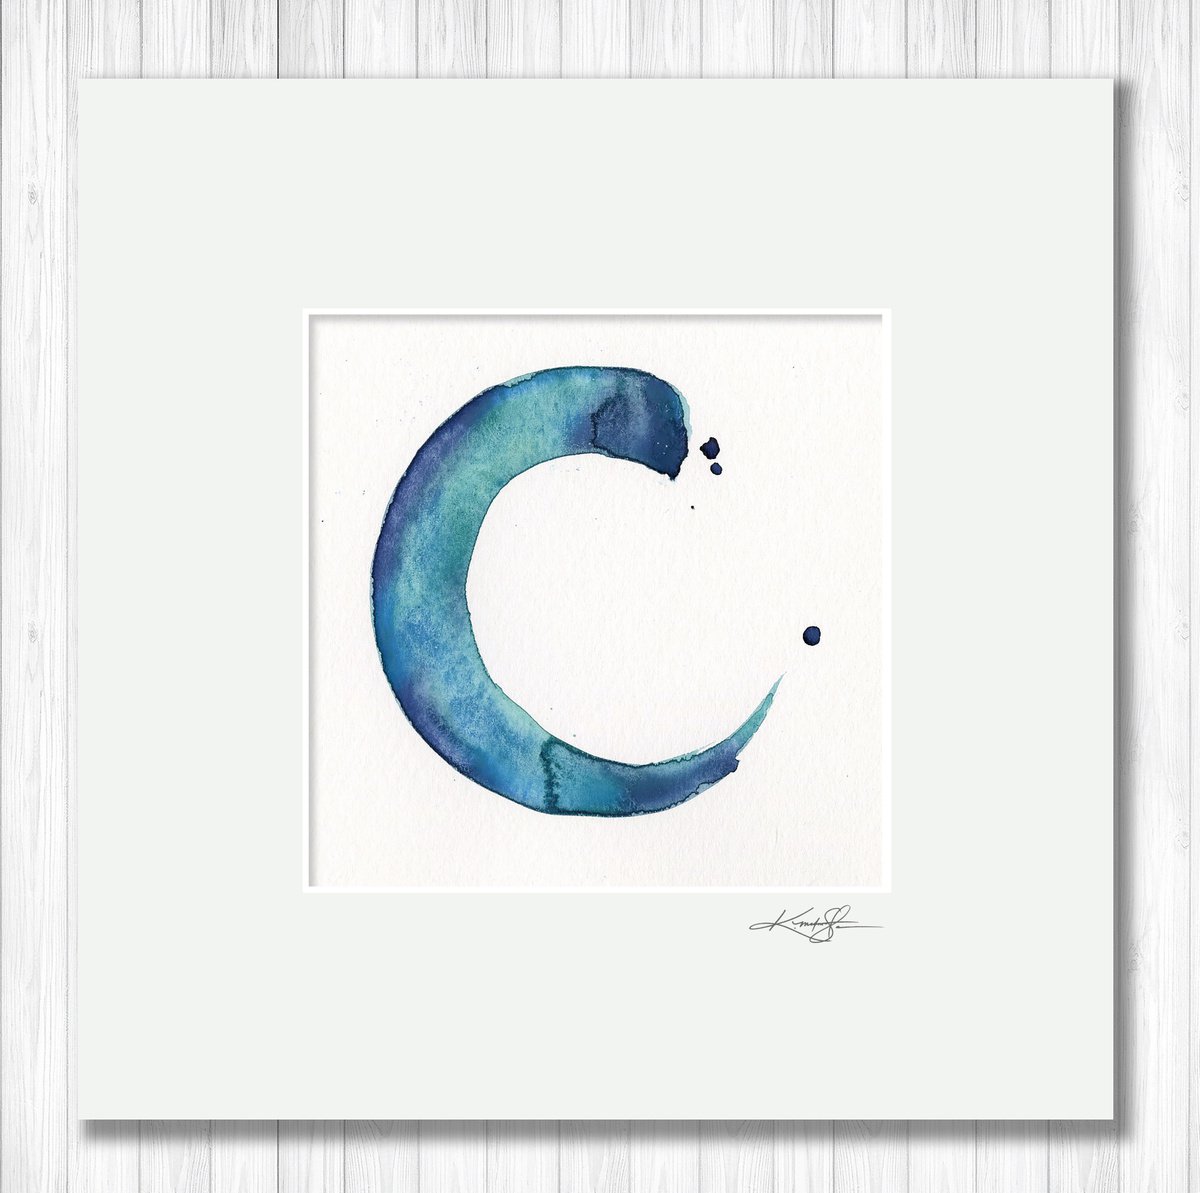 Enso Serenity 47 - Enso Abstract painting by Kathy Morton Stanion by Kathy Morton Stanion